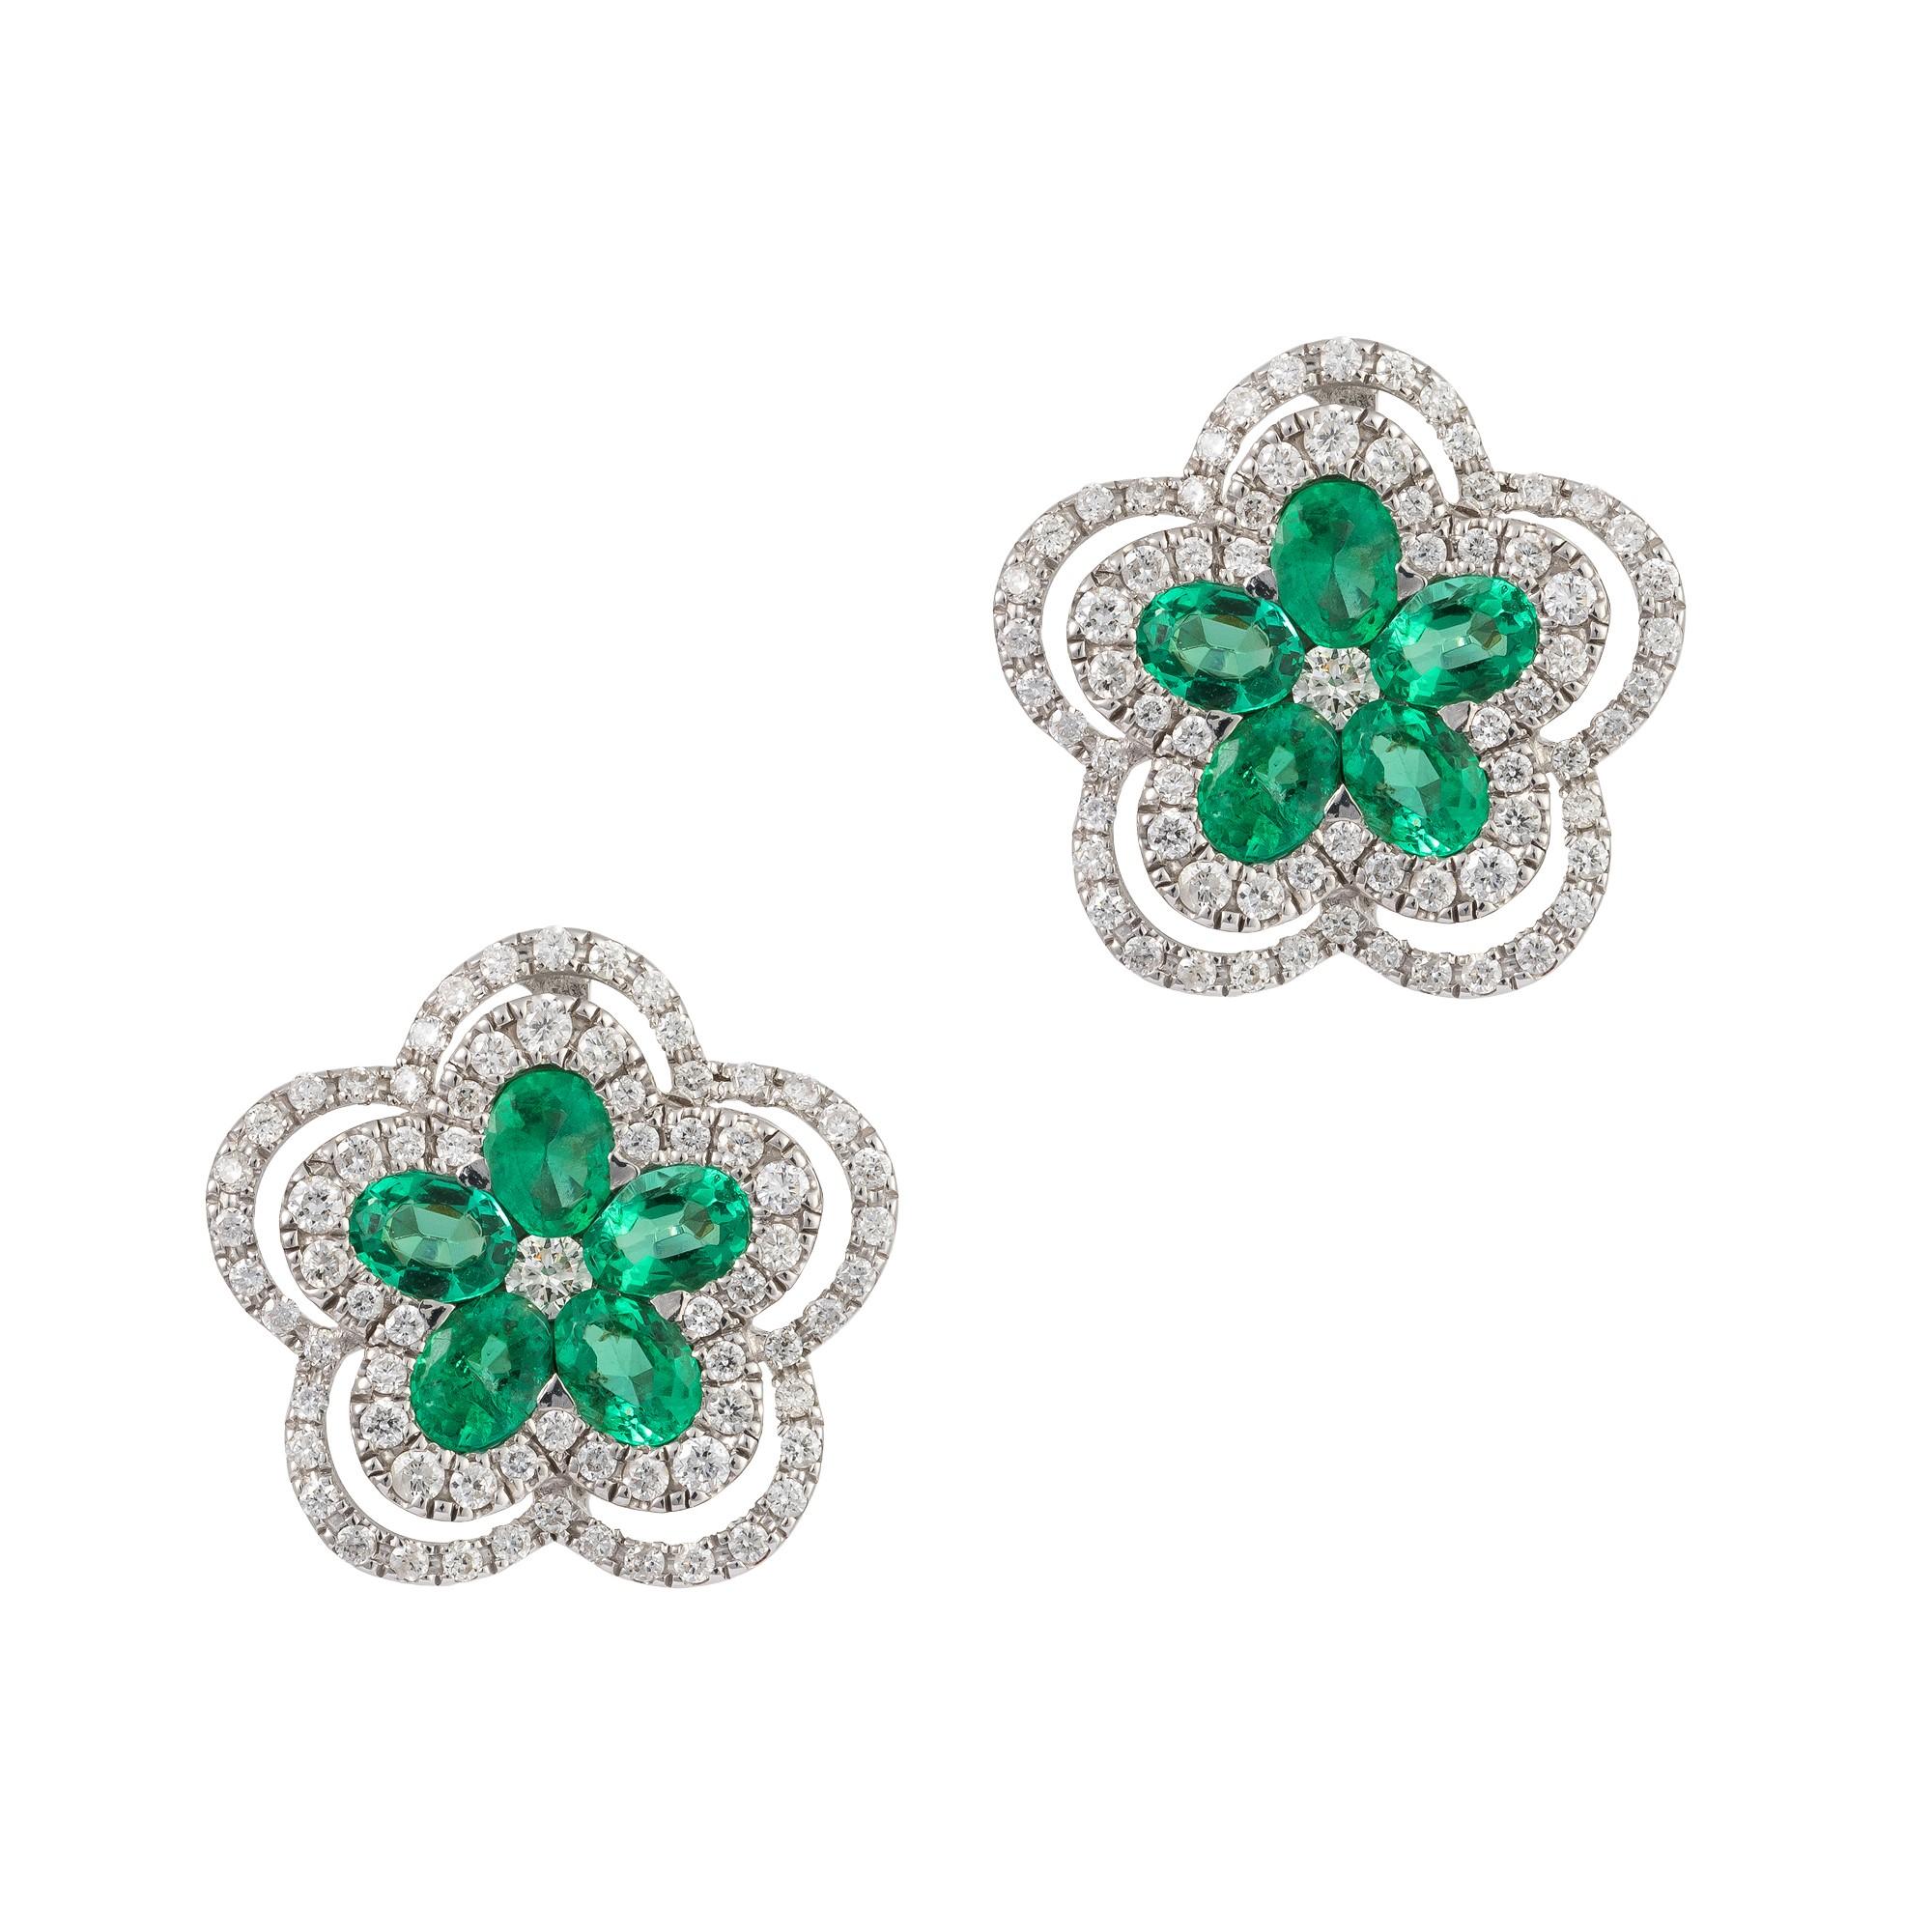 The Following Item we are offering is this Rare Important Radiant 18KT Gold Gorgeous Glittering and Sparkling Magnificent Fancy Emerald and Diamond Earrings. Earrings Contains over 2CTS of Beautiful Fancy Cut Emeralds and Diamonds!!! Stones are Very